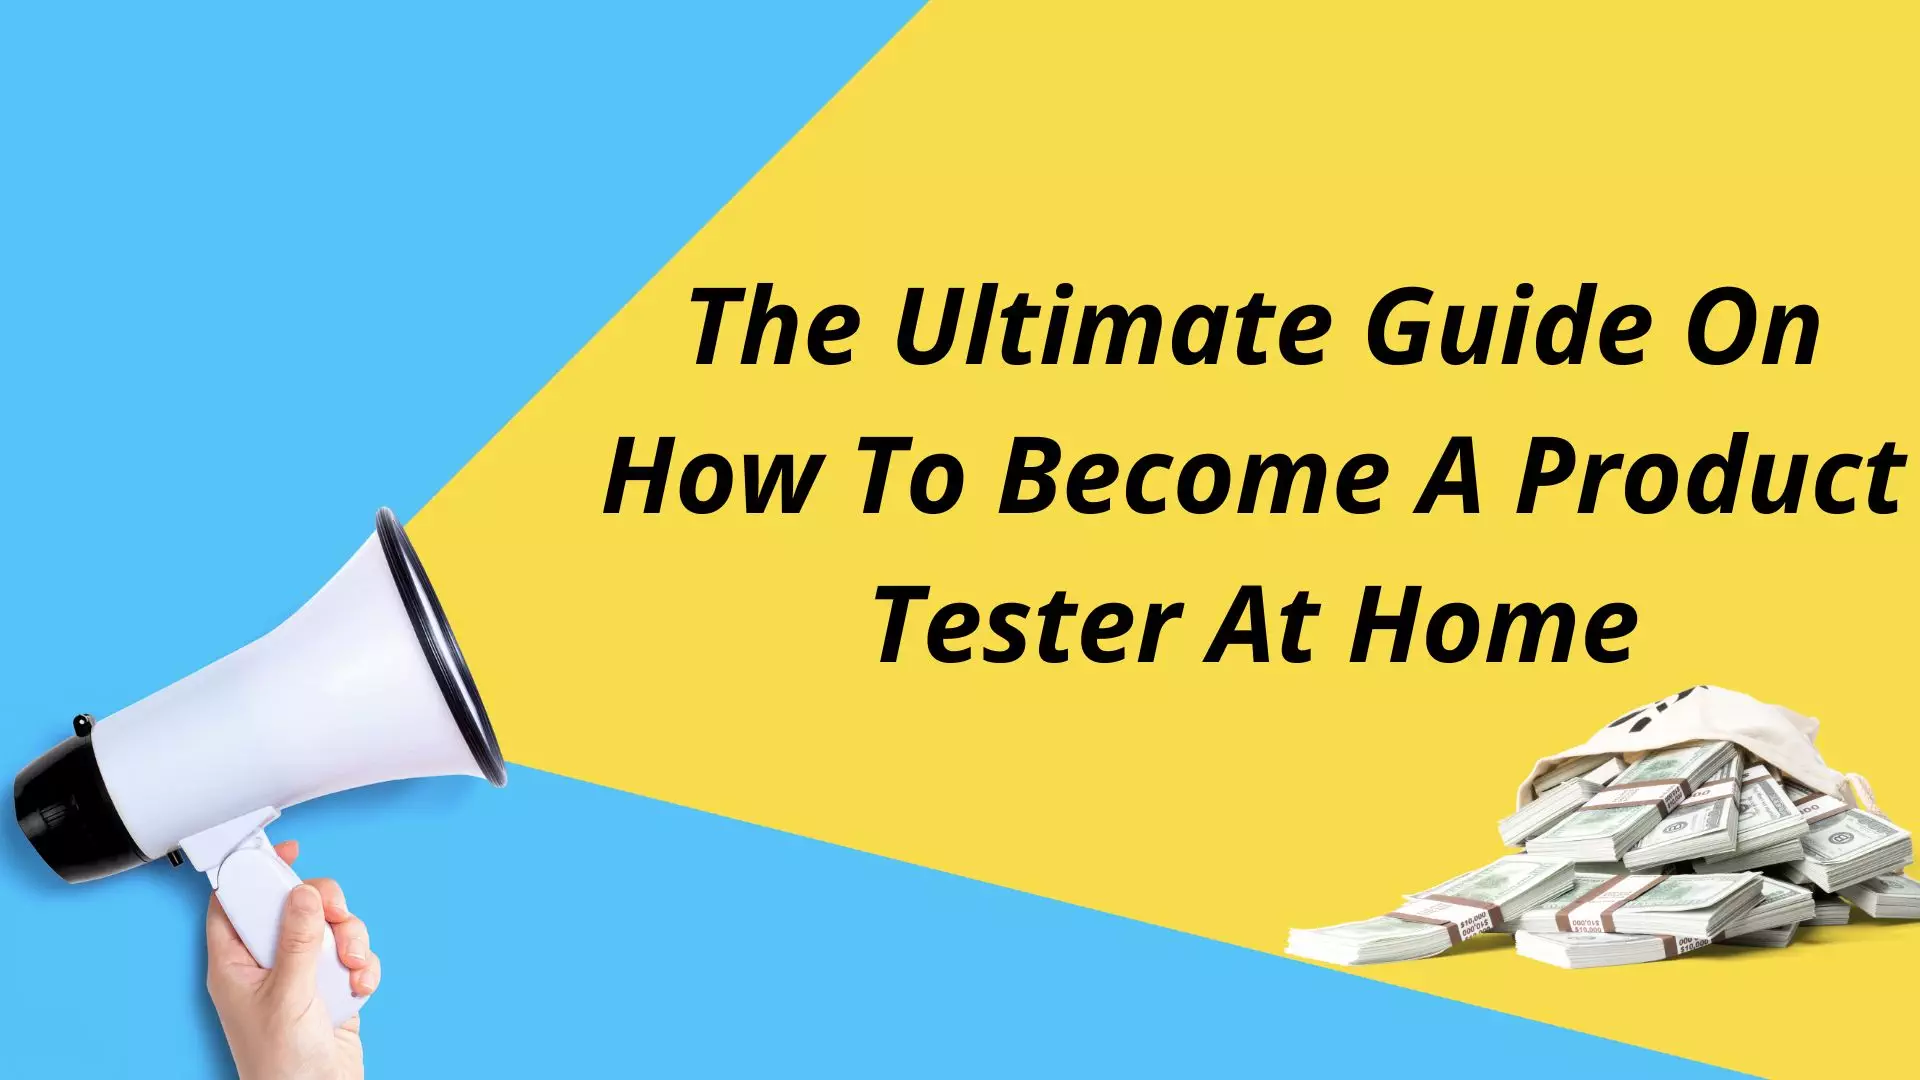 The Ultimate Guide On How To Become A Product Tester At Home